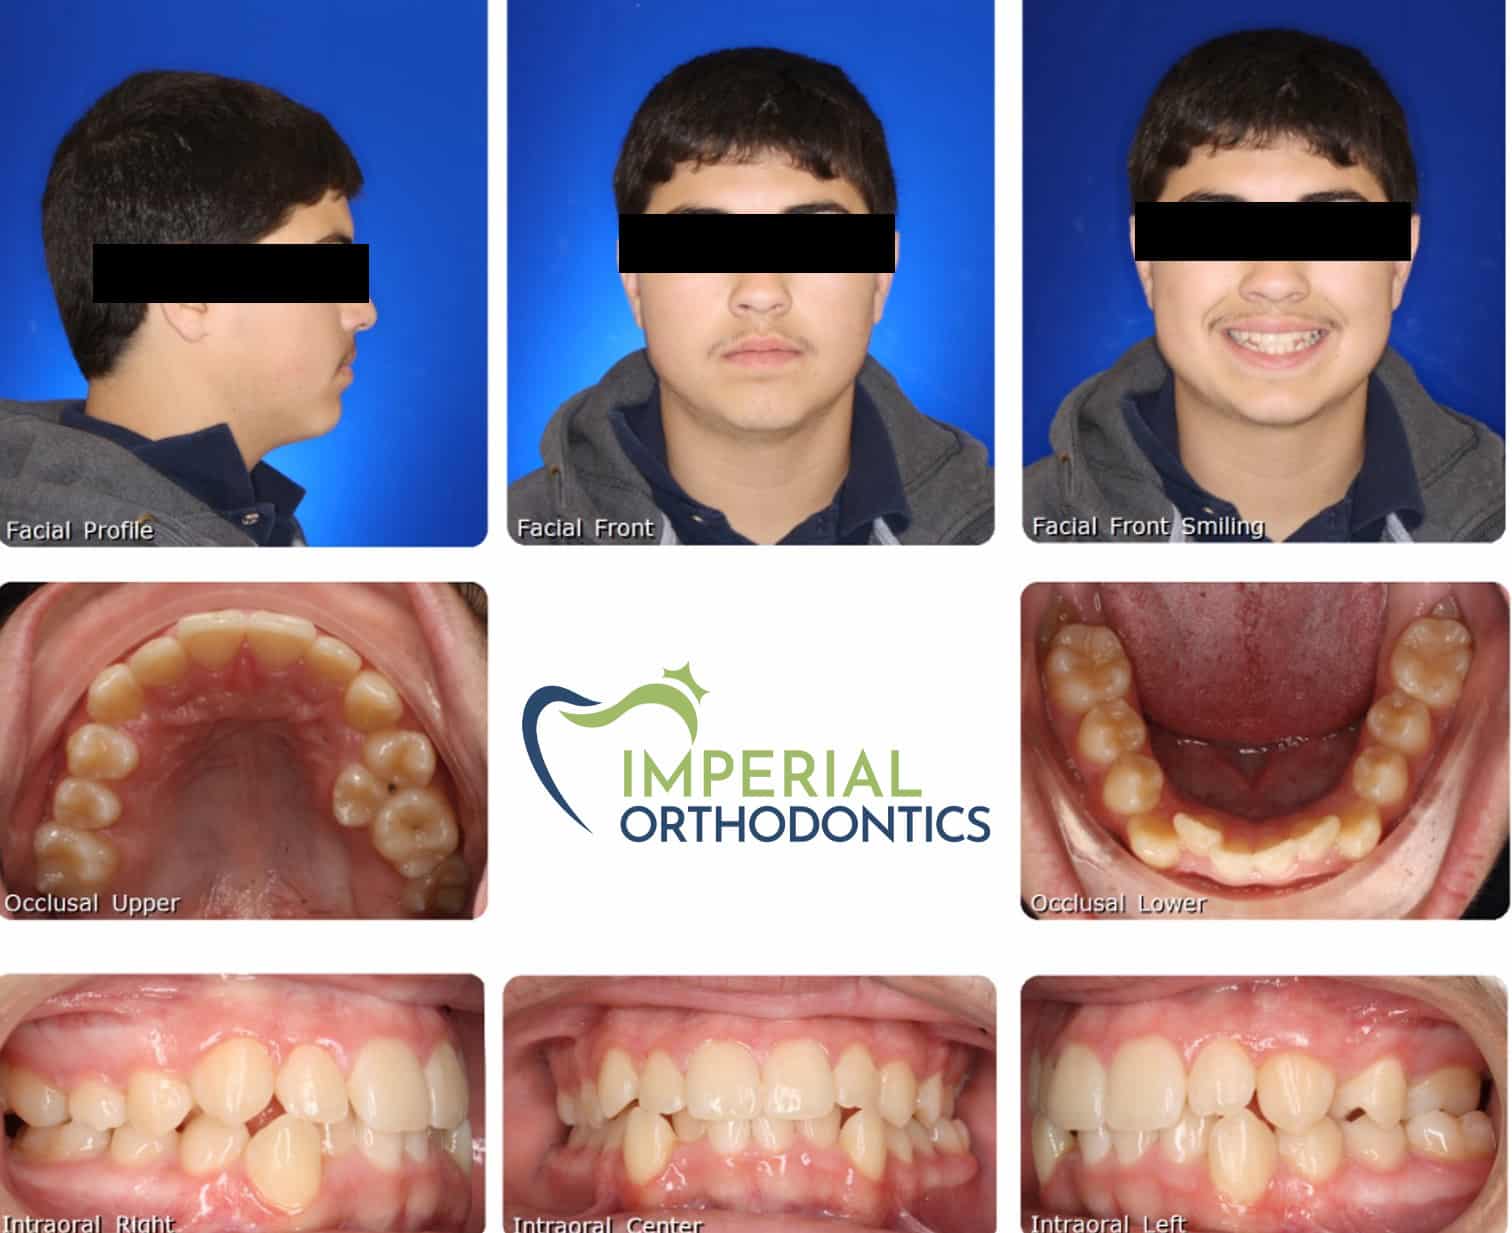 Before and after Imperial Orthodontics in Sugar Land, TX